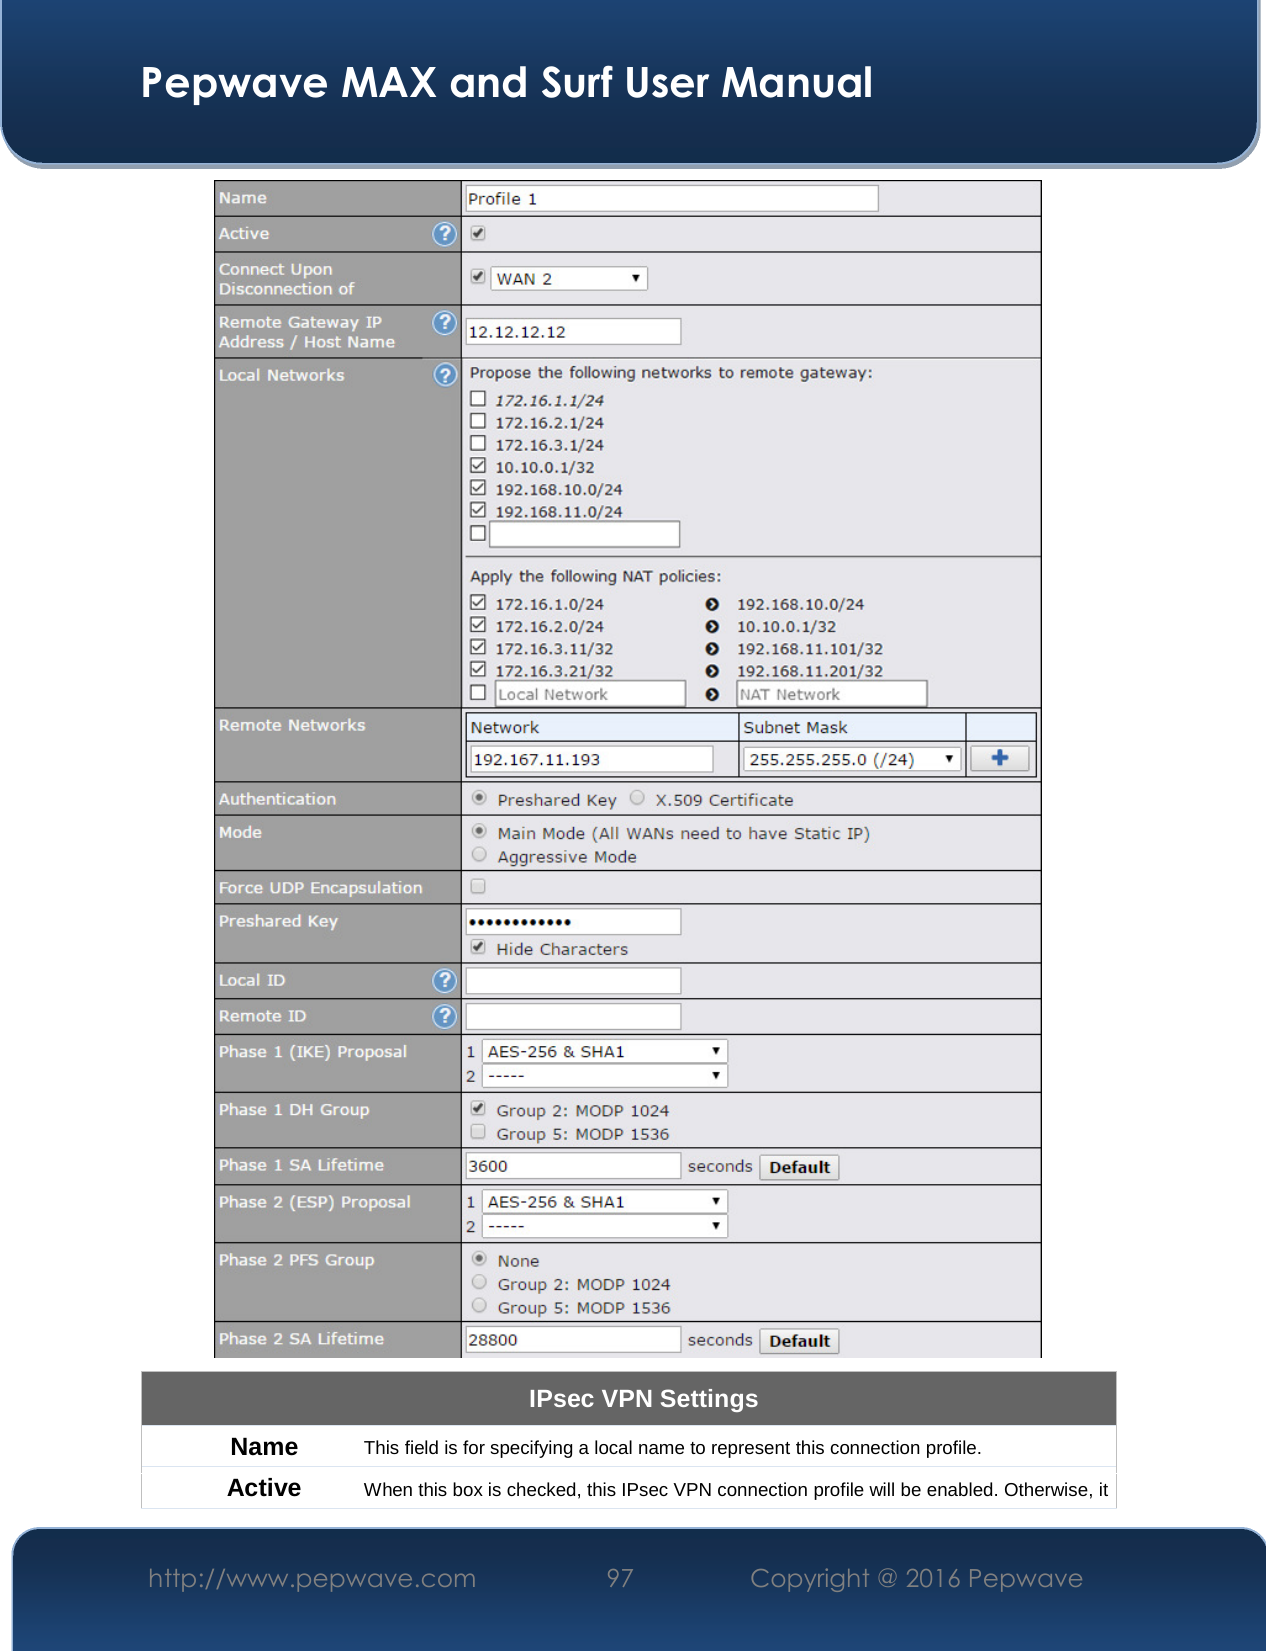  Pepwave MAX and Surf User Manual http://www.pepwave.com  97    Copyright @ 2016 Pepwave    IPsec VPN Settings Name This field is for specifying a local name to represent this connection profile.  Active When this box is checked, this IPsec VPN connection profile will be enabled. Otherwise, it 